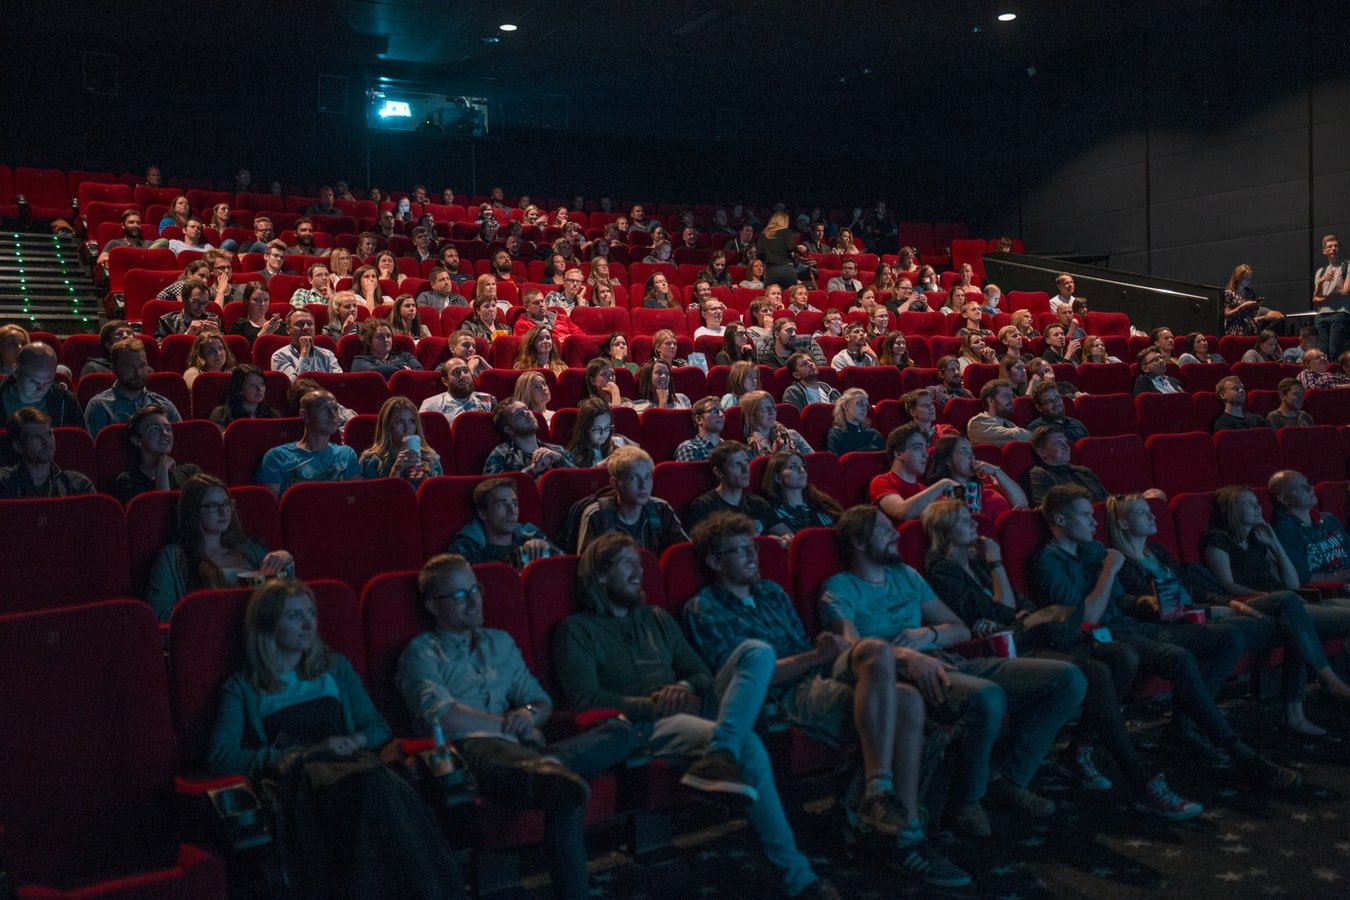 People watching a movie in a cinema. | Photo: Unsplash/Krists Luhaers